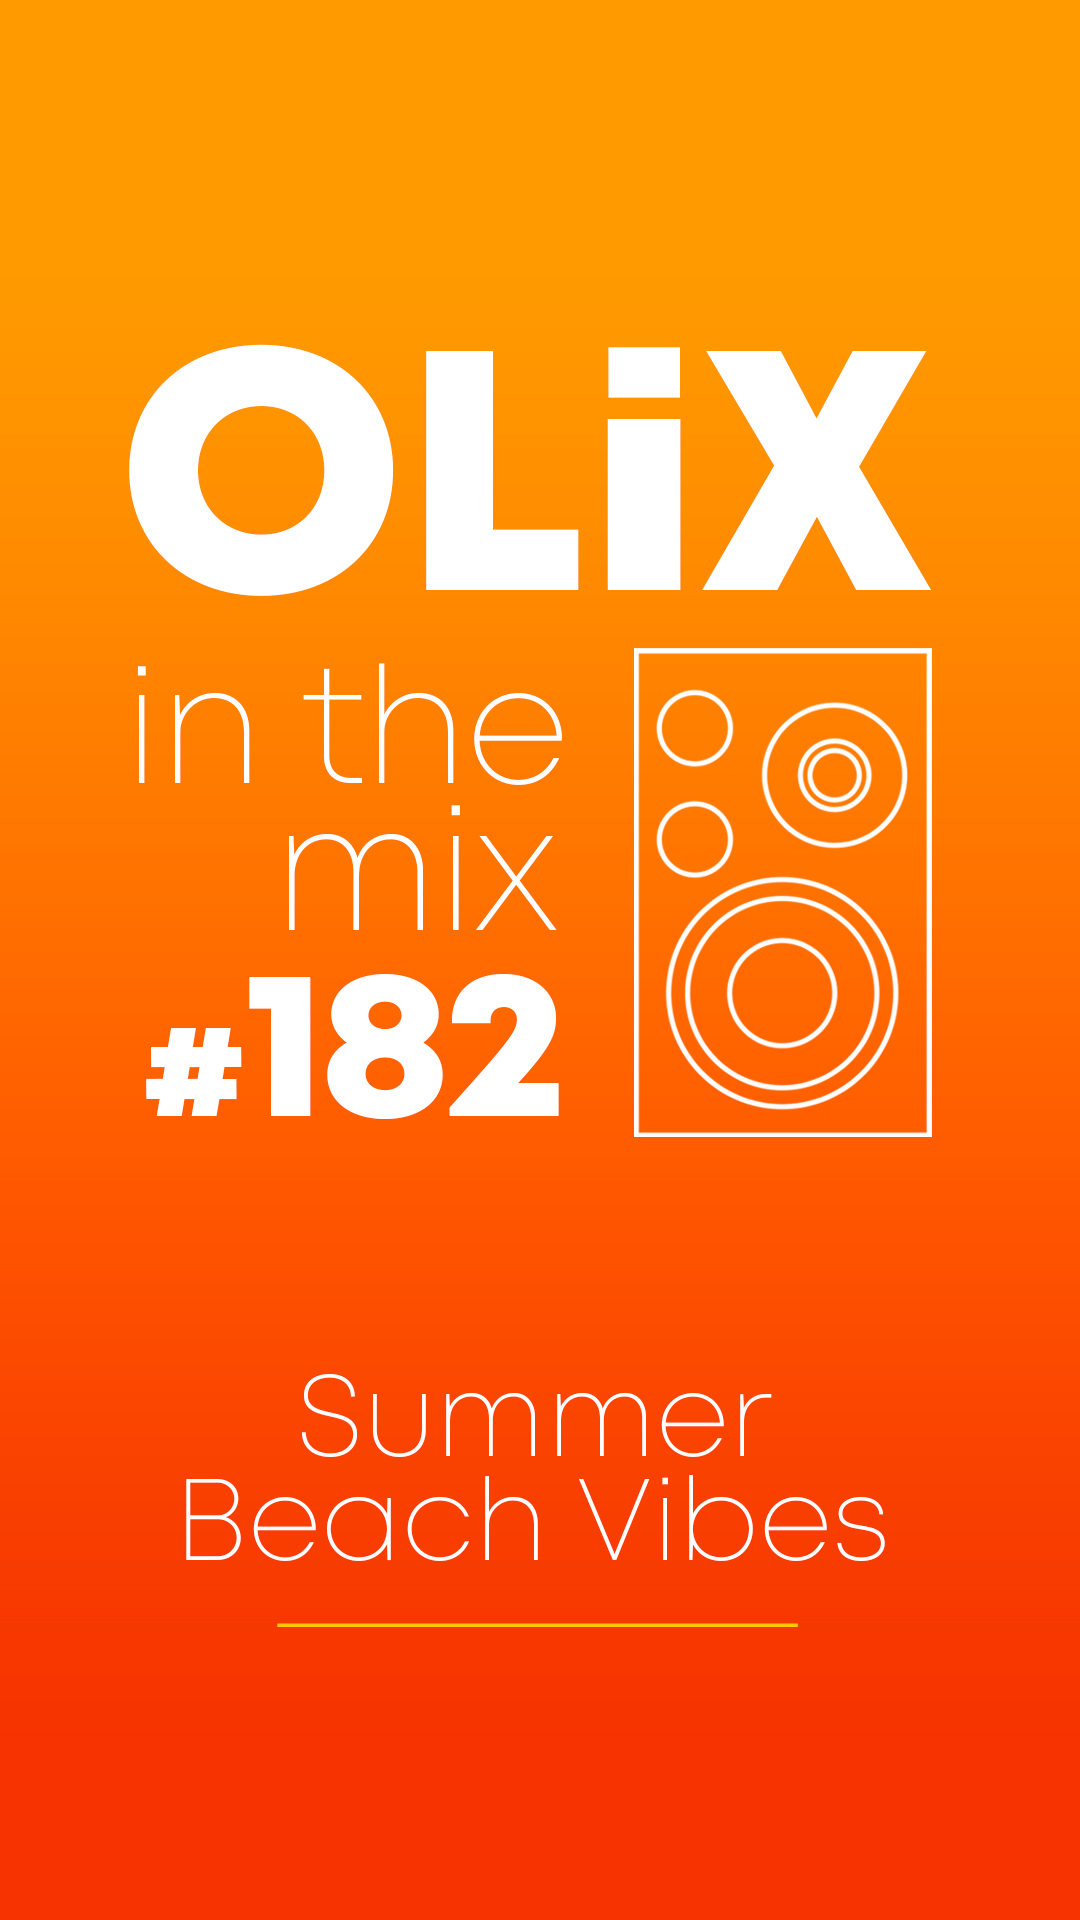 OLiX in the Mix - 182 - Summer Beach Vibes